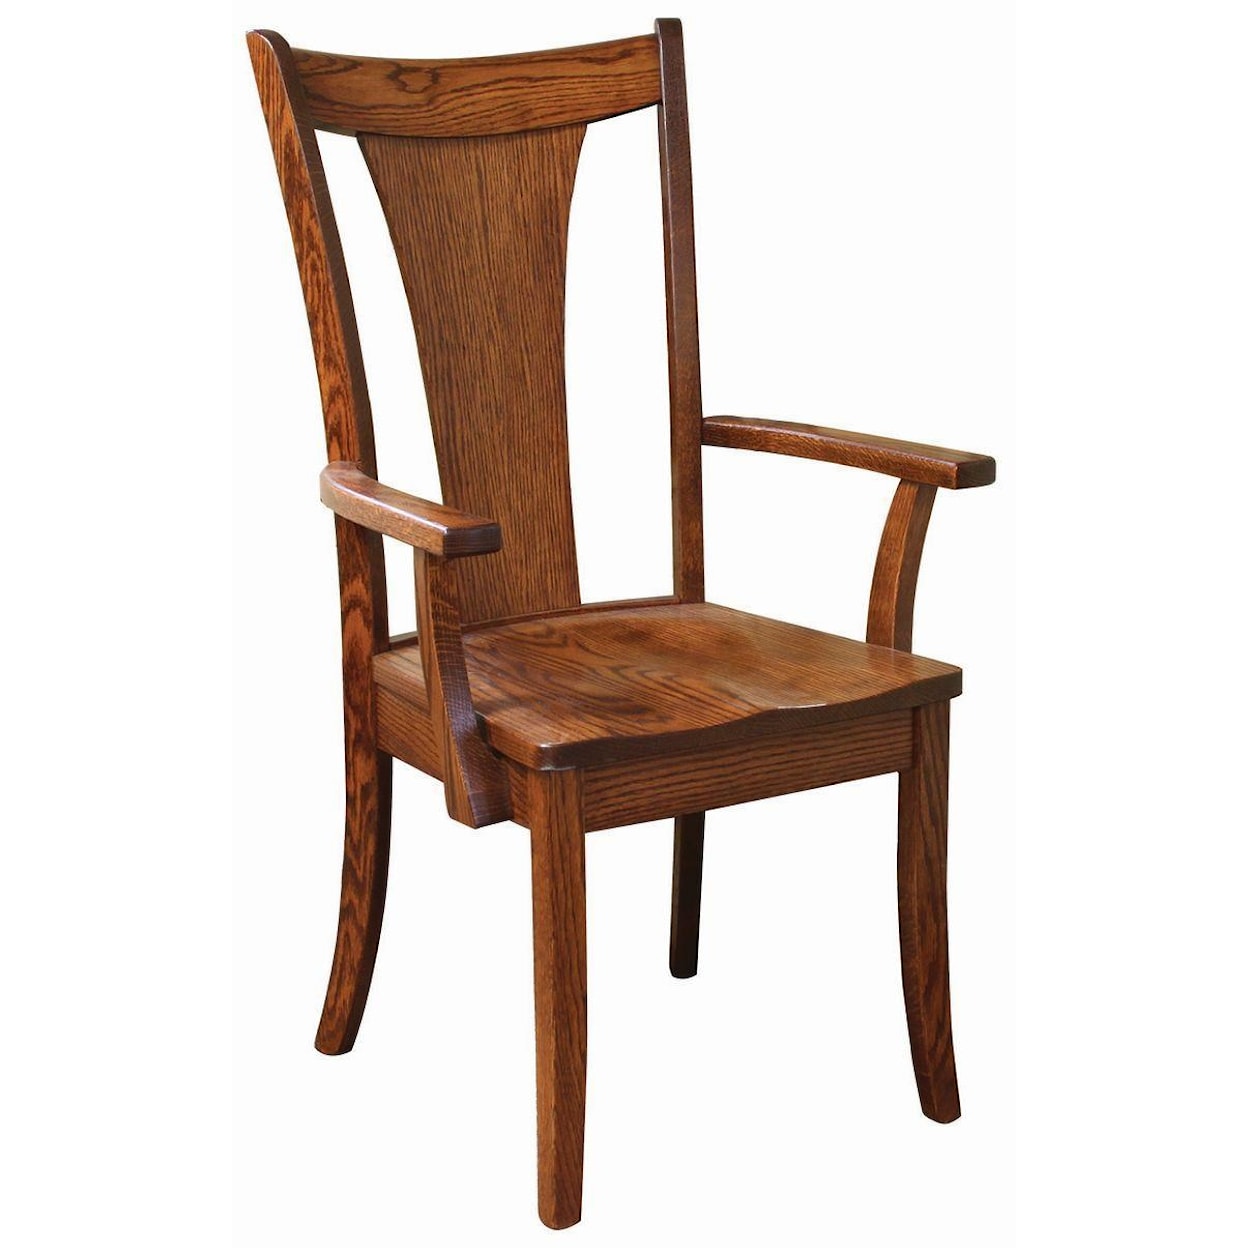 Oakland Wood Falcon Arm Chair